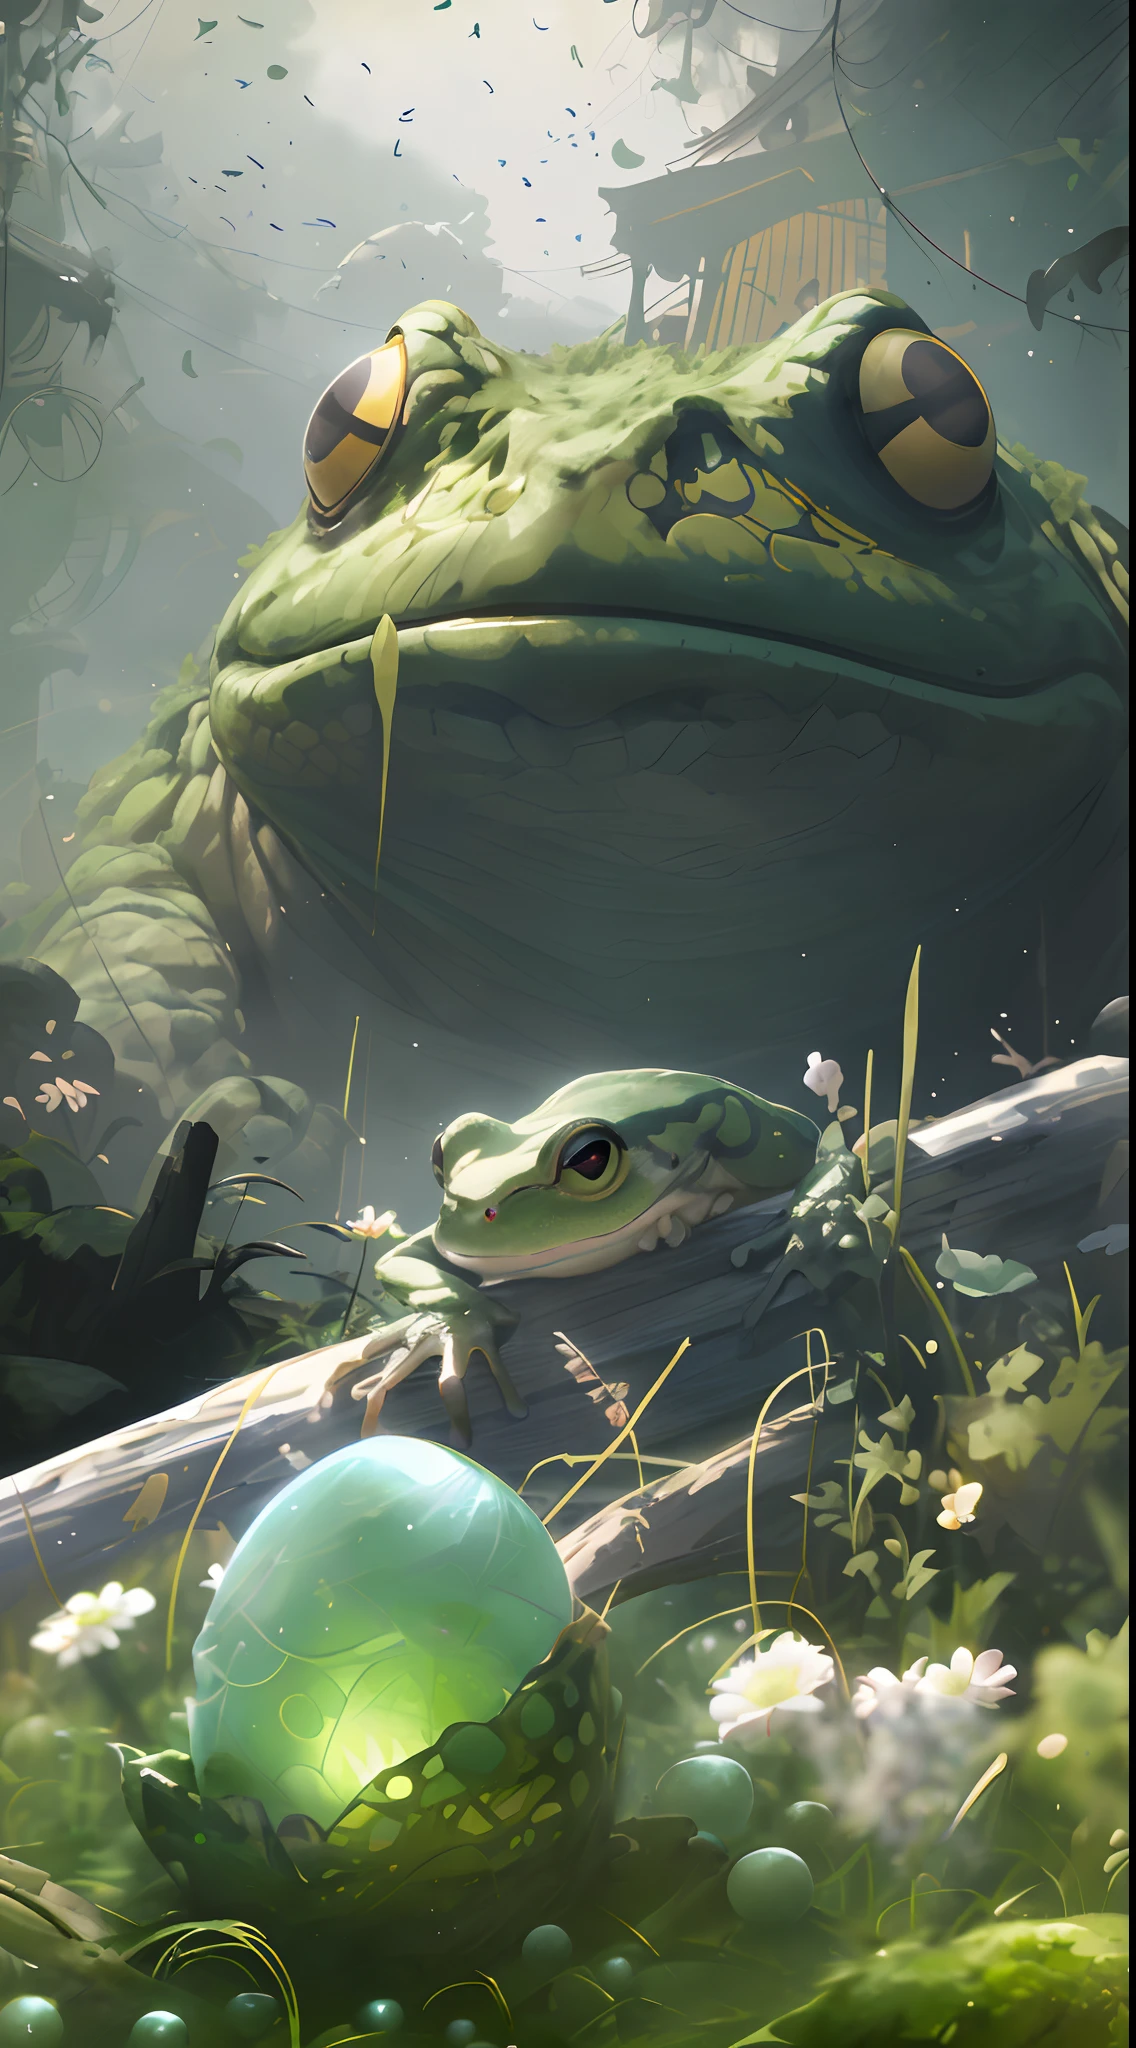 There is a frog sitting next to a green ball, highly realistic concept art, wlop and andrei riabovitchev, art by Wlop and Greg Rutkowski, Concept art wallpaper 4K, wlop and ross thran, frog perspective, Relaxing concept art, award winning concept art, WLOP and Greg Rutkowski, wlop and ross thran